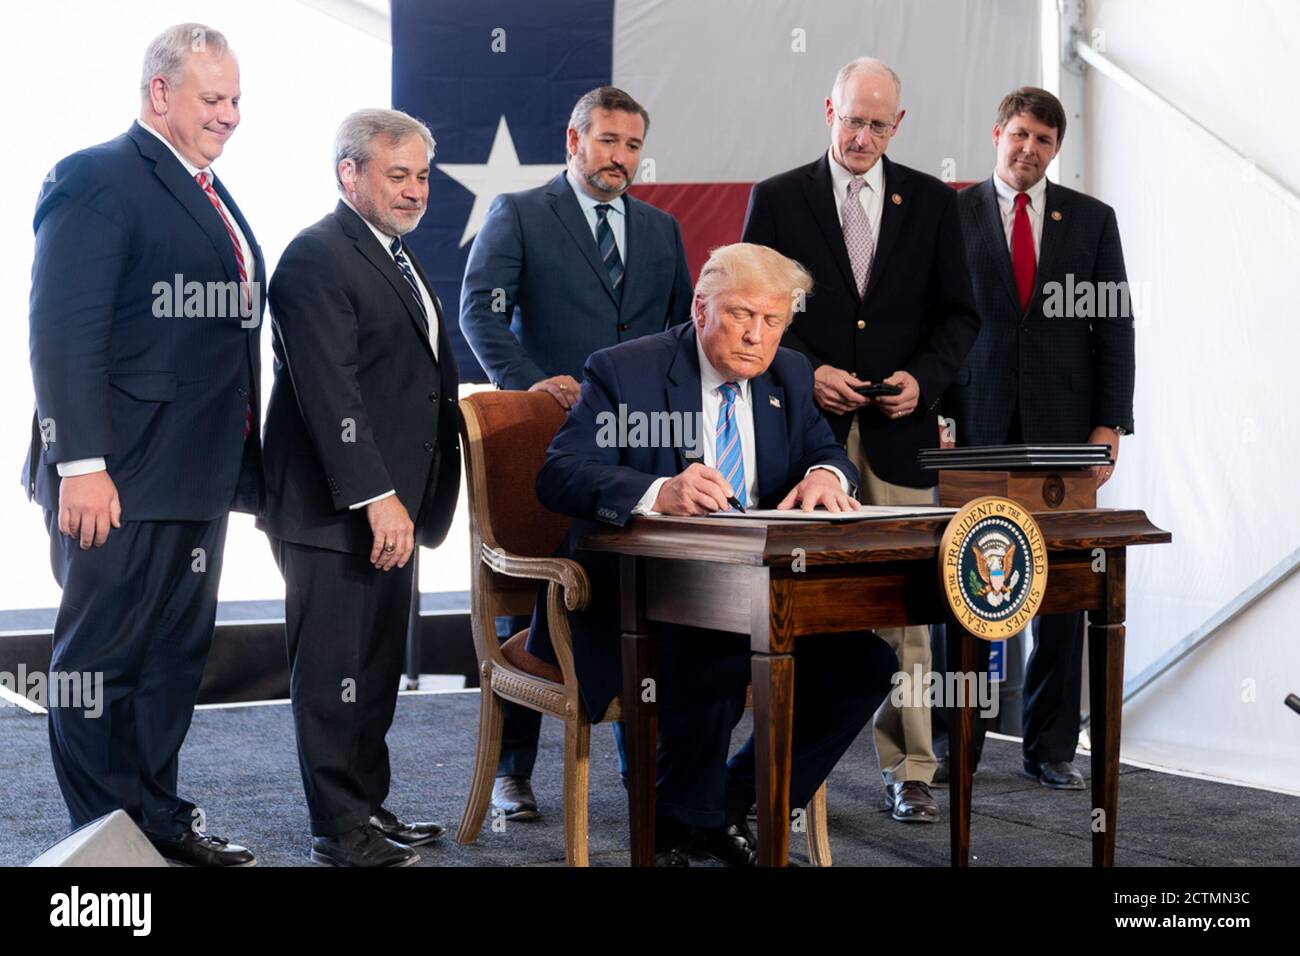 President Trump in Texas. President Donald J. Trump, joined by Secretary of Interior David Bernhardt, left, Secretary of Energy Dan Brouillette, Senator Ted Cruz, U.S. Rep. Mike Conaway, R-Texas, and U.S. Rep. Jodey Arrington, R-Texas,  signs presidential permits Wednesday, July 29, 2020, at the Double Eagle Oil Rig in Midland, Texas. Stock Photo